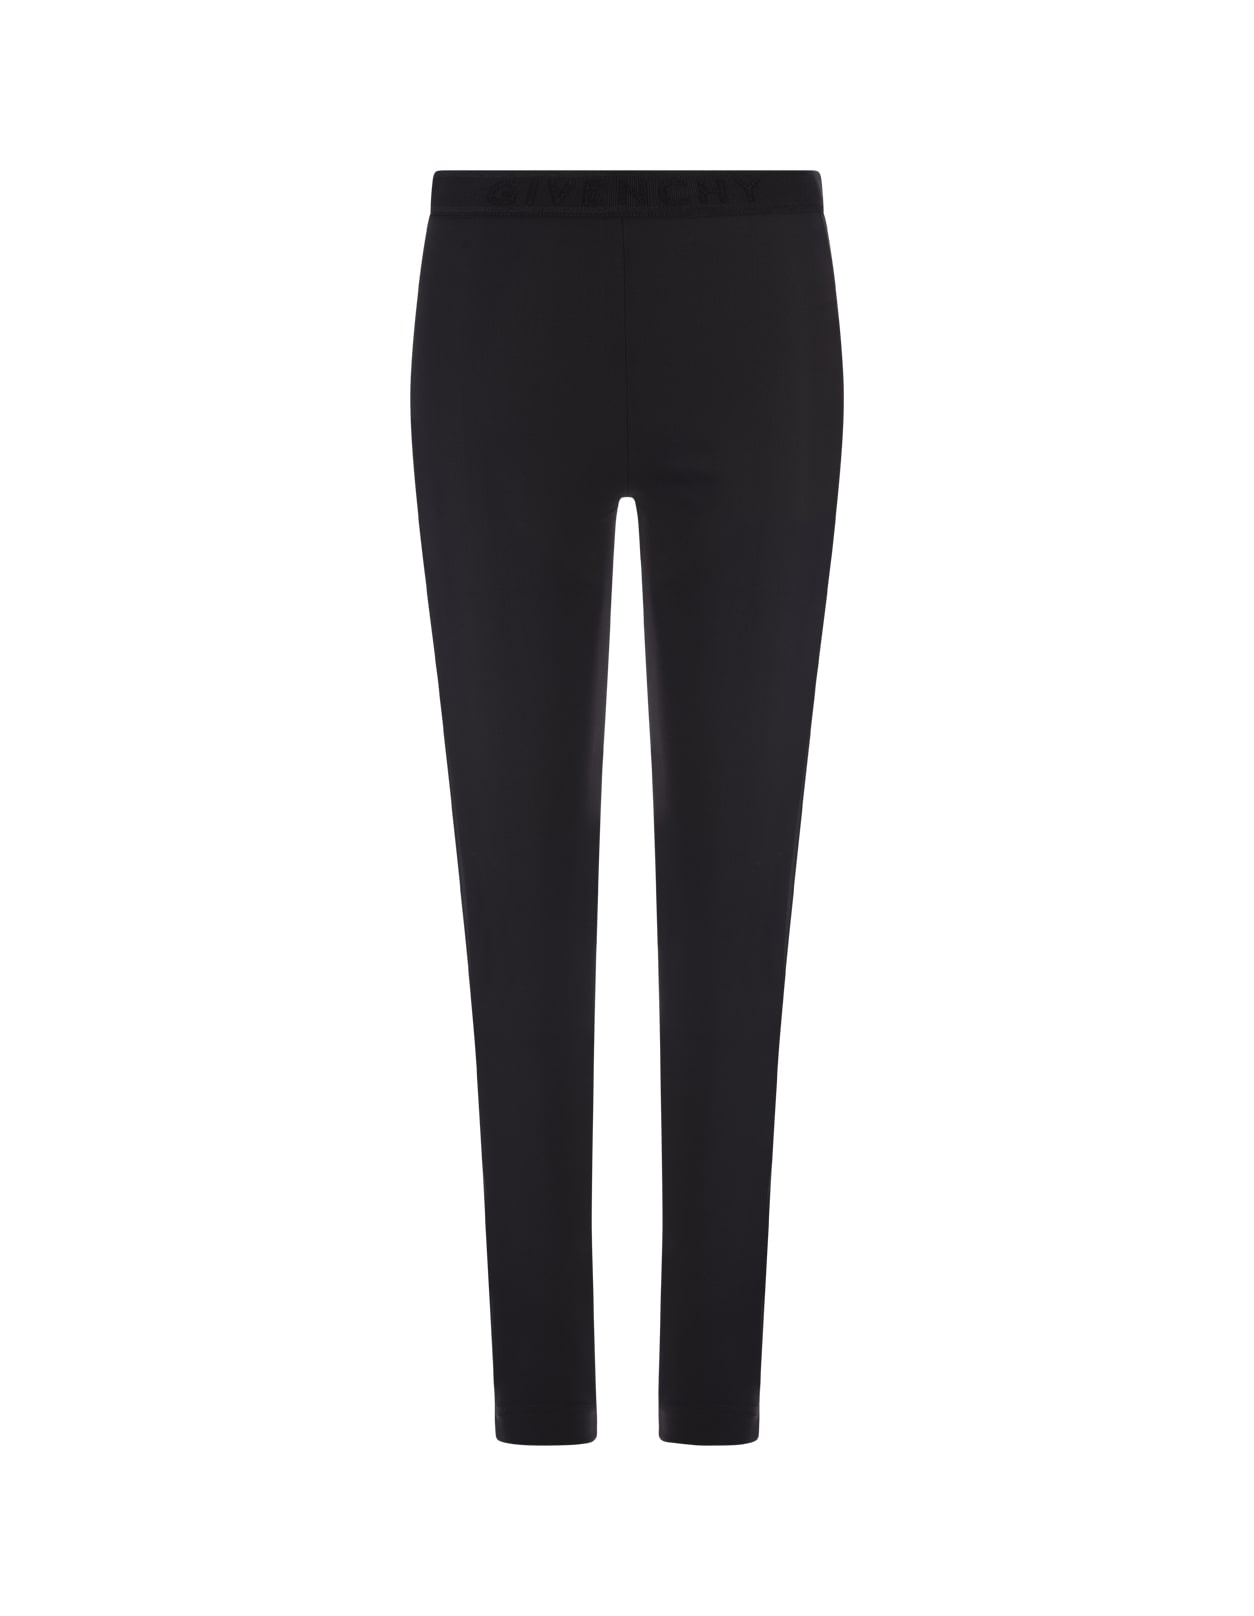 GIVENCHY BLACK JERSEY LEGGINGS WITH GIVENCHY BELT